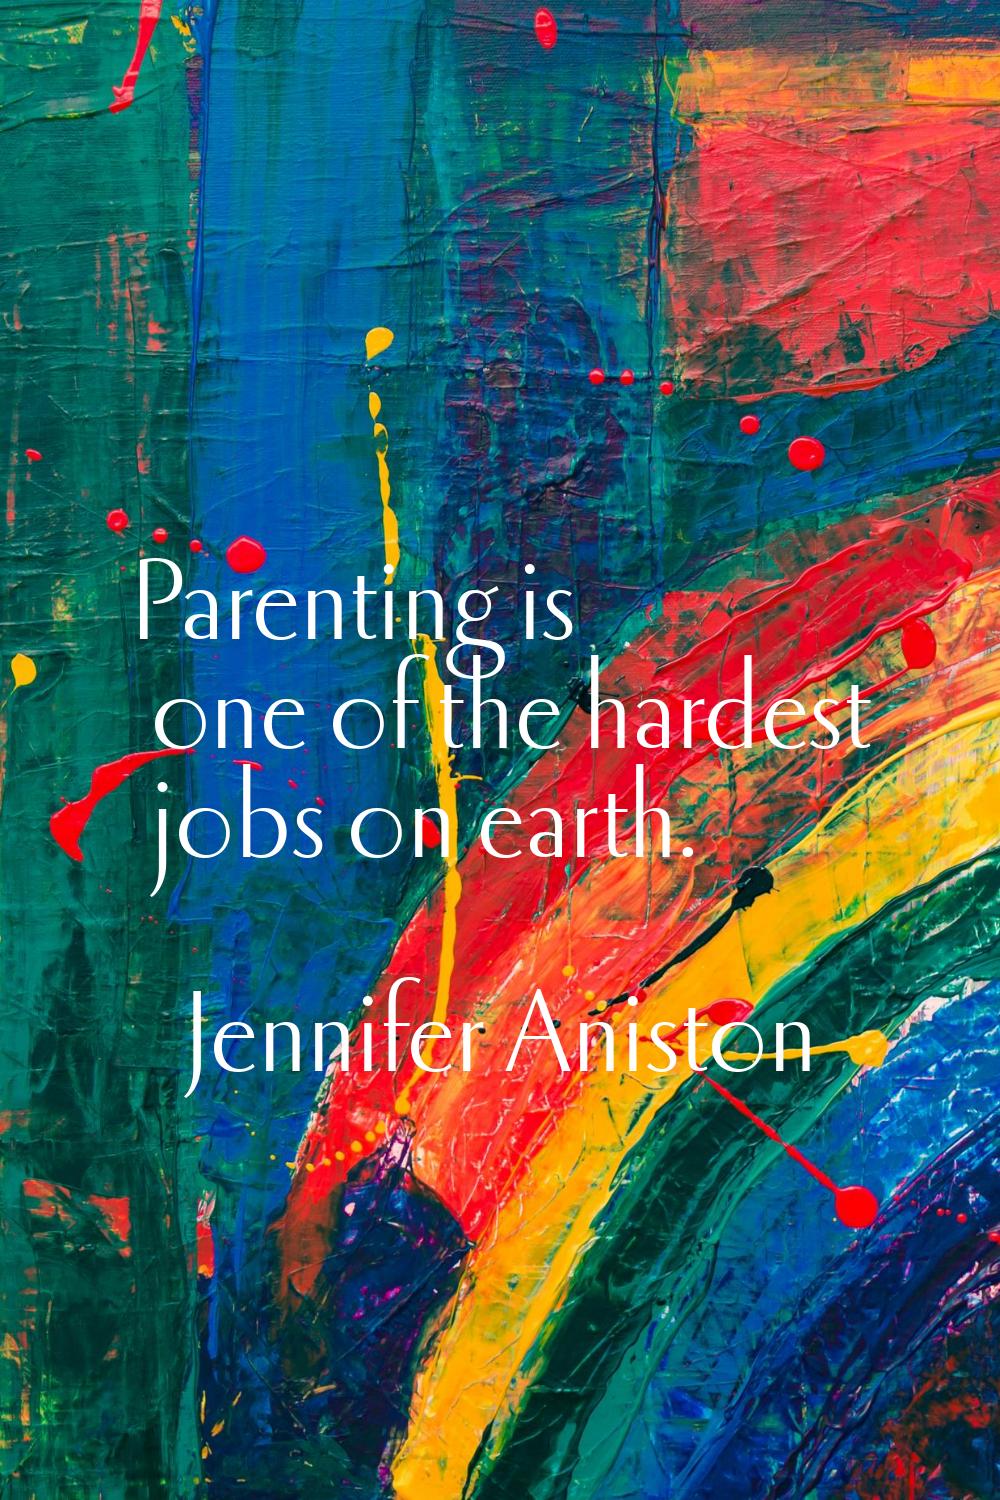 Parenting is one of the hardest jobs on earth.